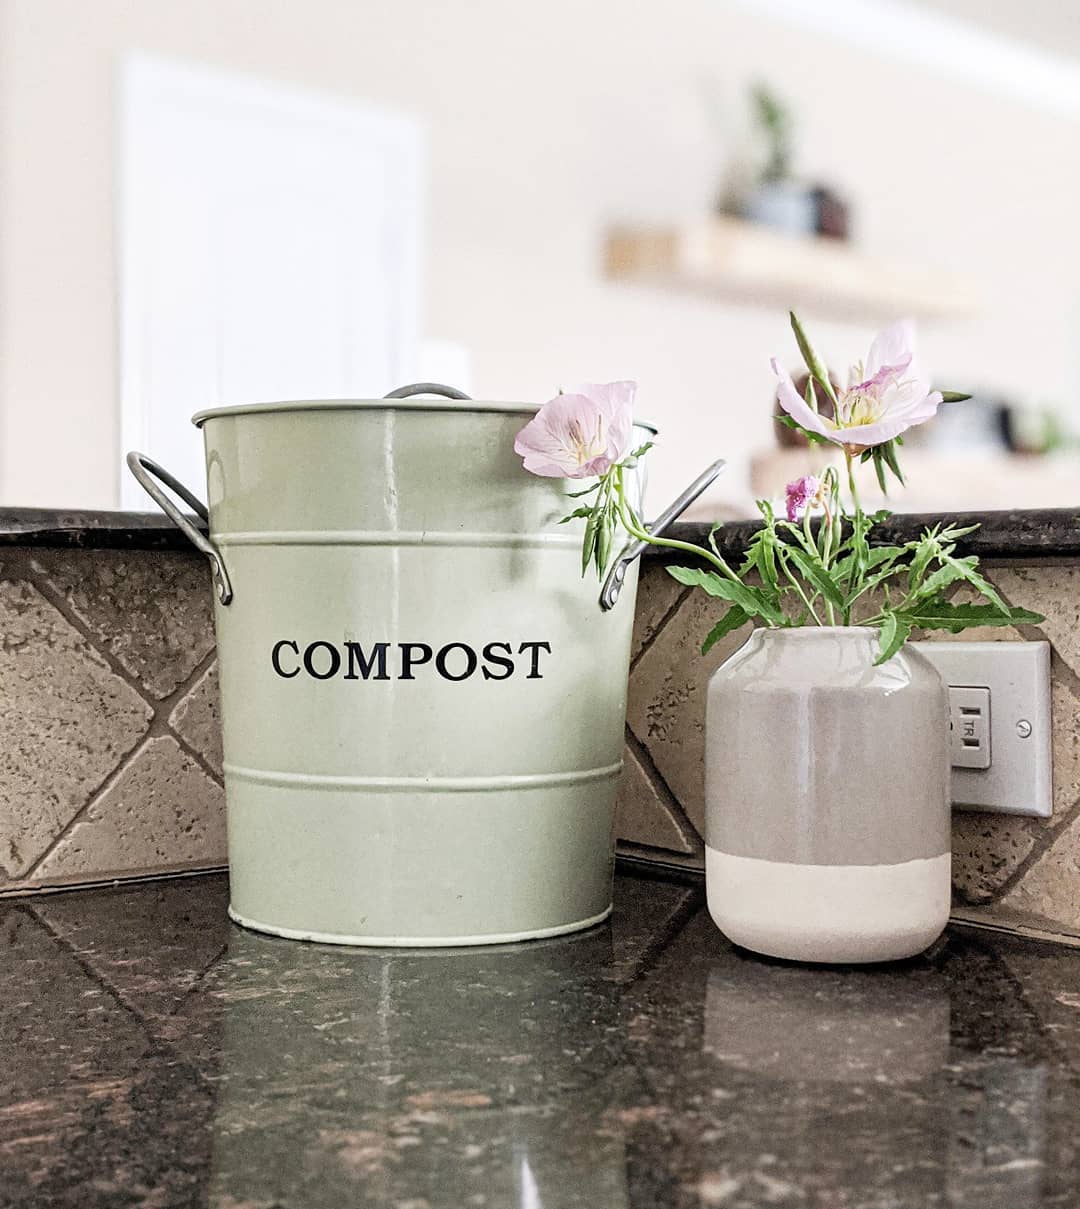 Small Compost Bucket Sitting on Kitchen Counter. Photo by Instagram user @pursuing.roots